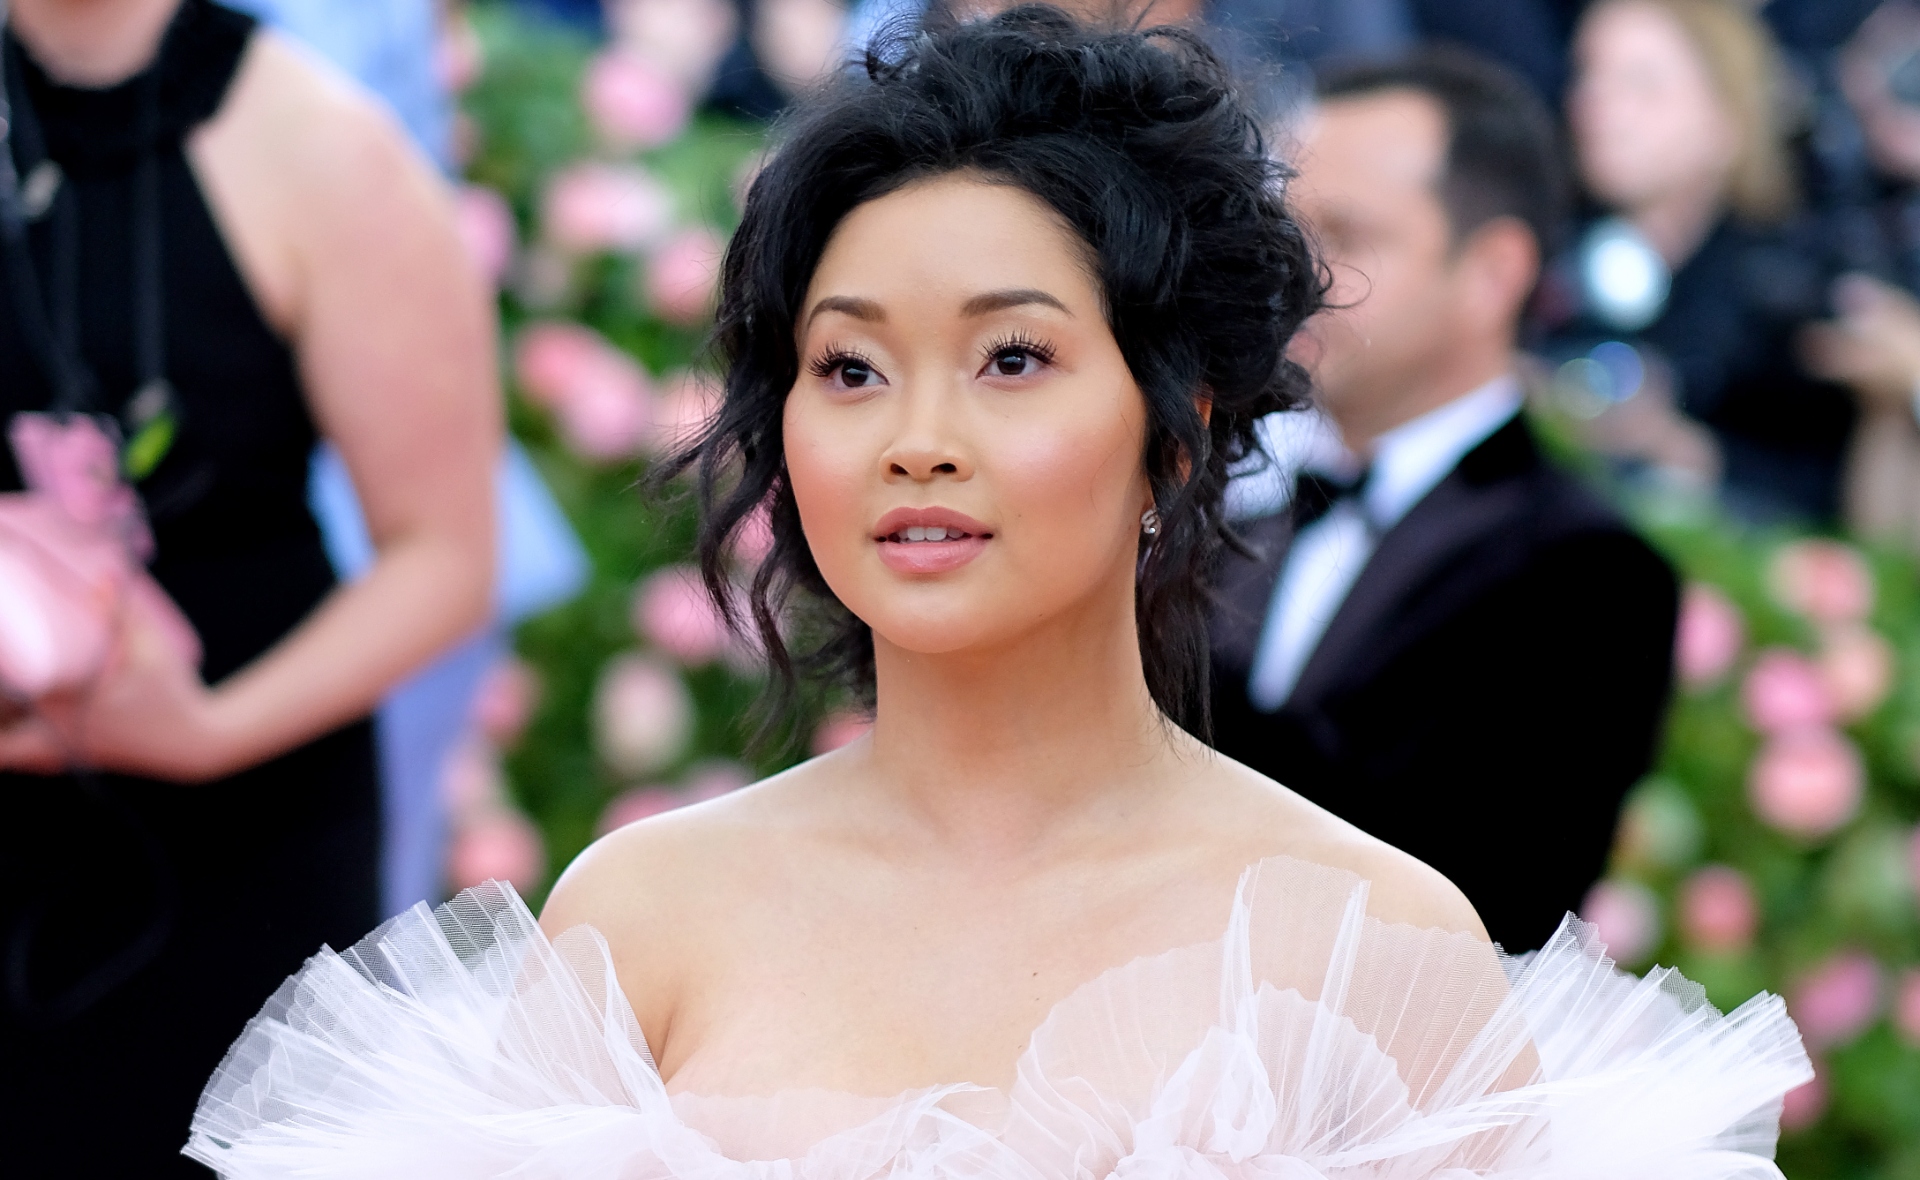 Lana Condor On The Unforgettable Life Advice Michelle Obama Gave Her